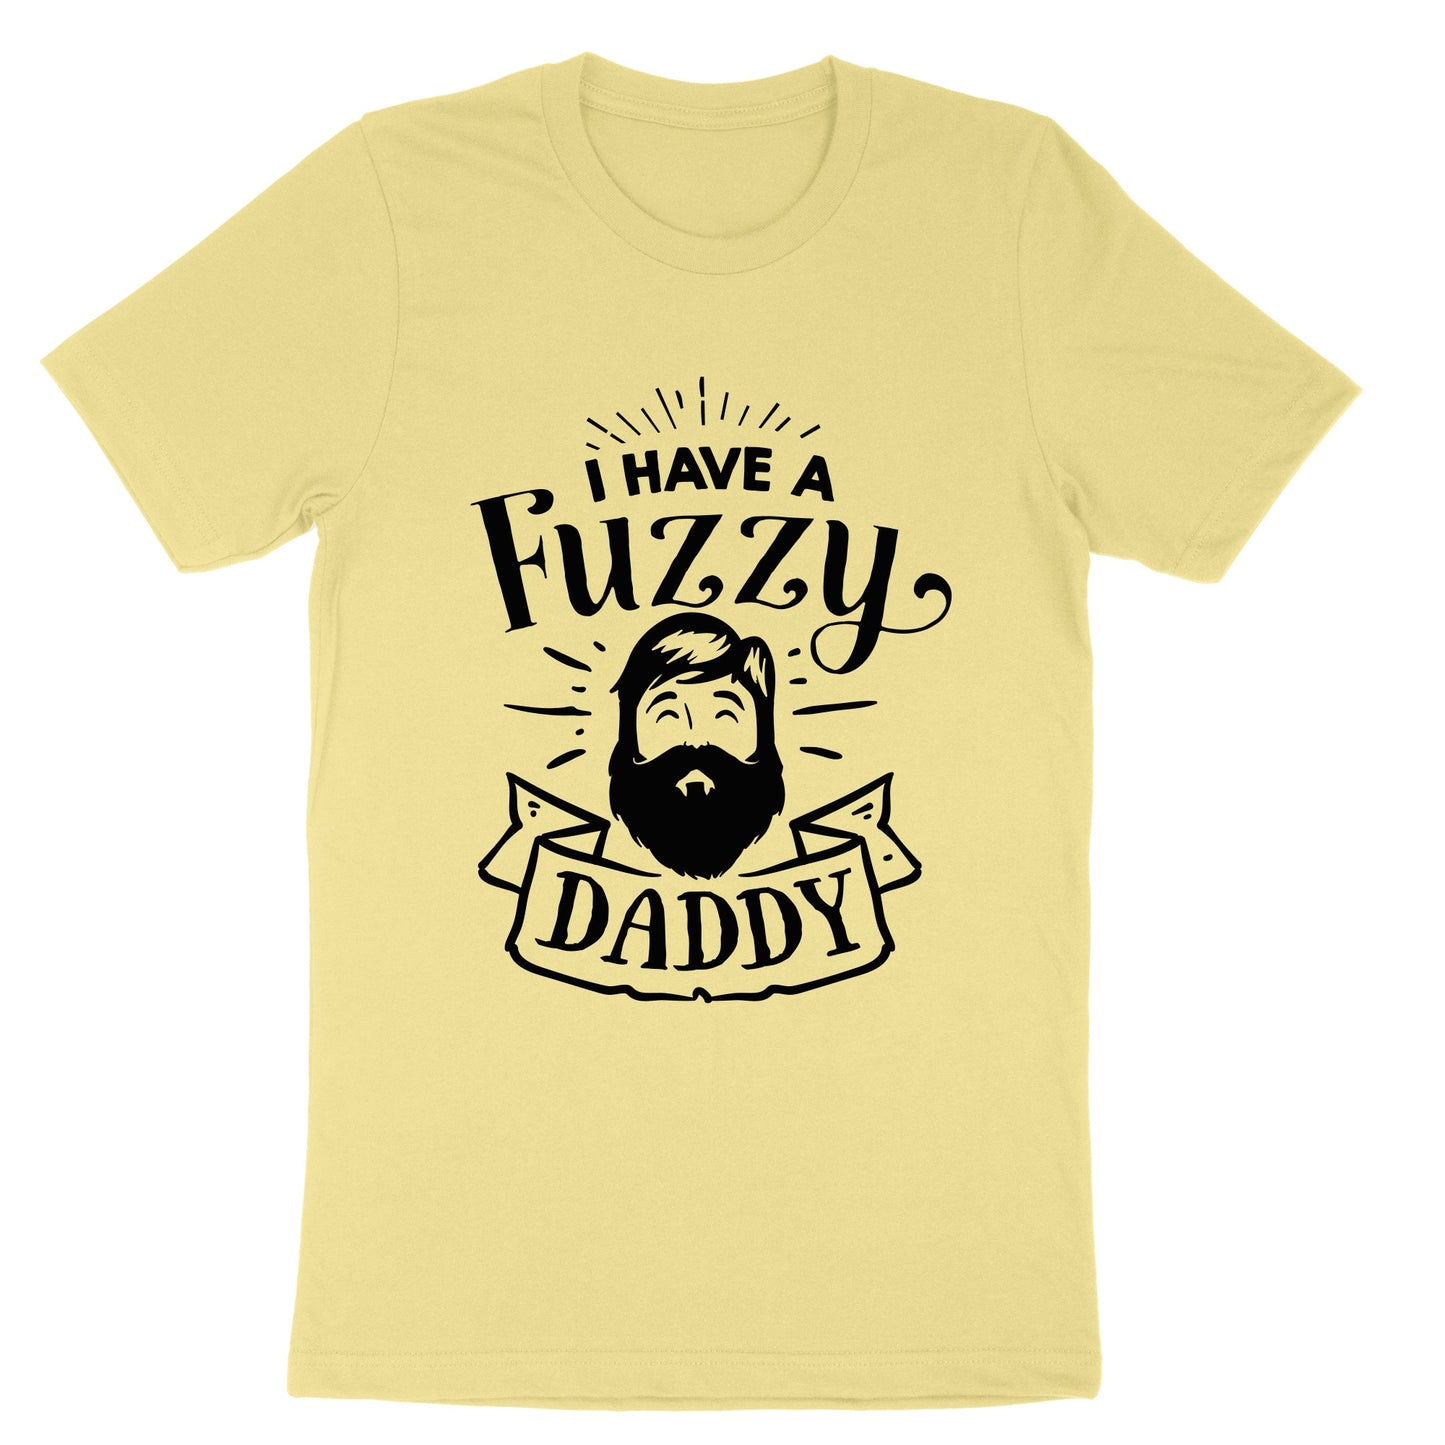 I Have a Fuzzy Daddy | Youth and Toddler Classic T-Shirt